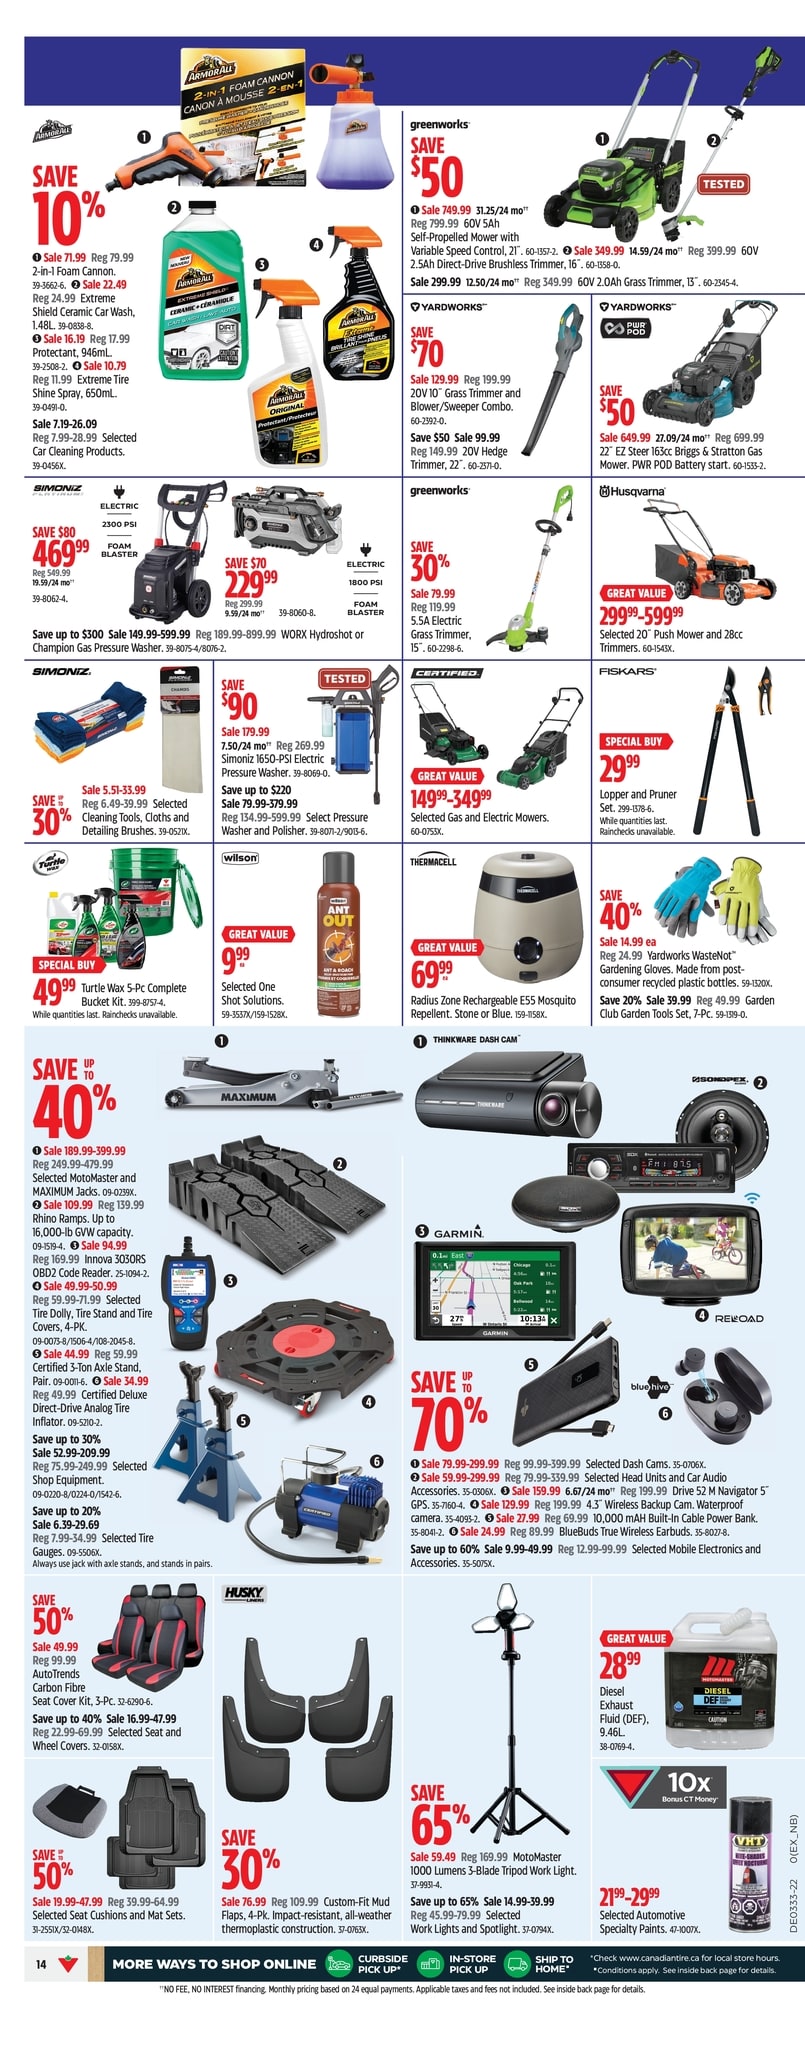 Canadian Tire - Weekly Flyer Specials - Page 14